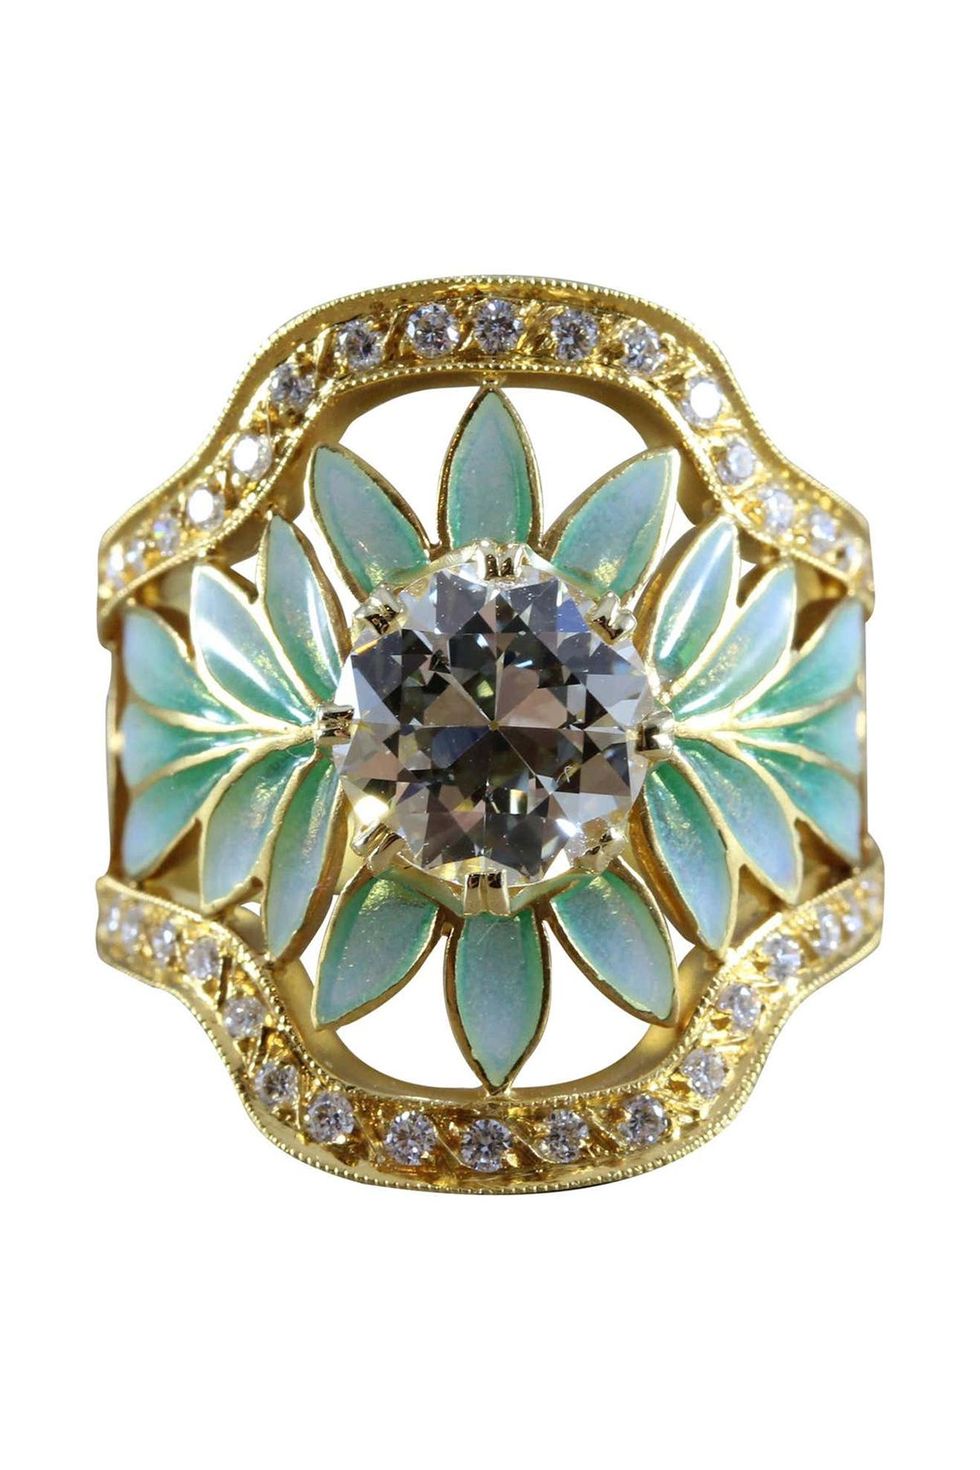 Louis Comfort Tiffany Jewelry & Watches - 7 For Sale at 1stDibs  louis  comfort tiffany jewelry for sale, louis comfort tiffany ring, louis comfort  tiffany signature